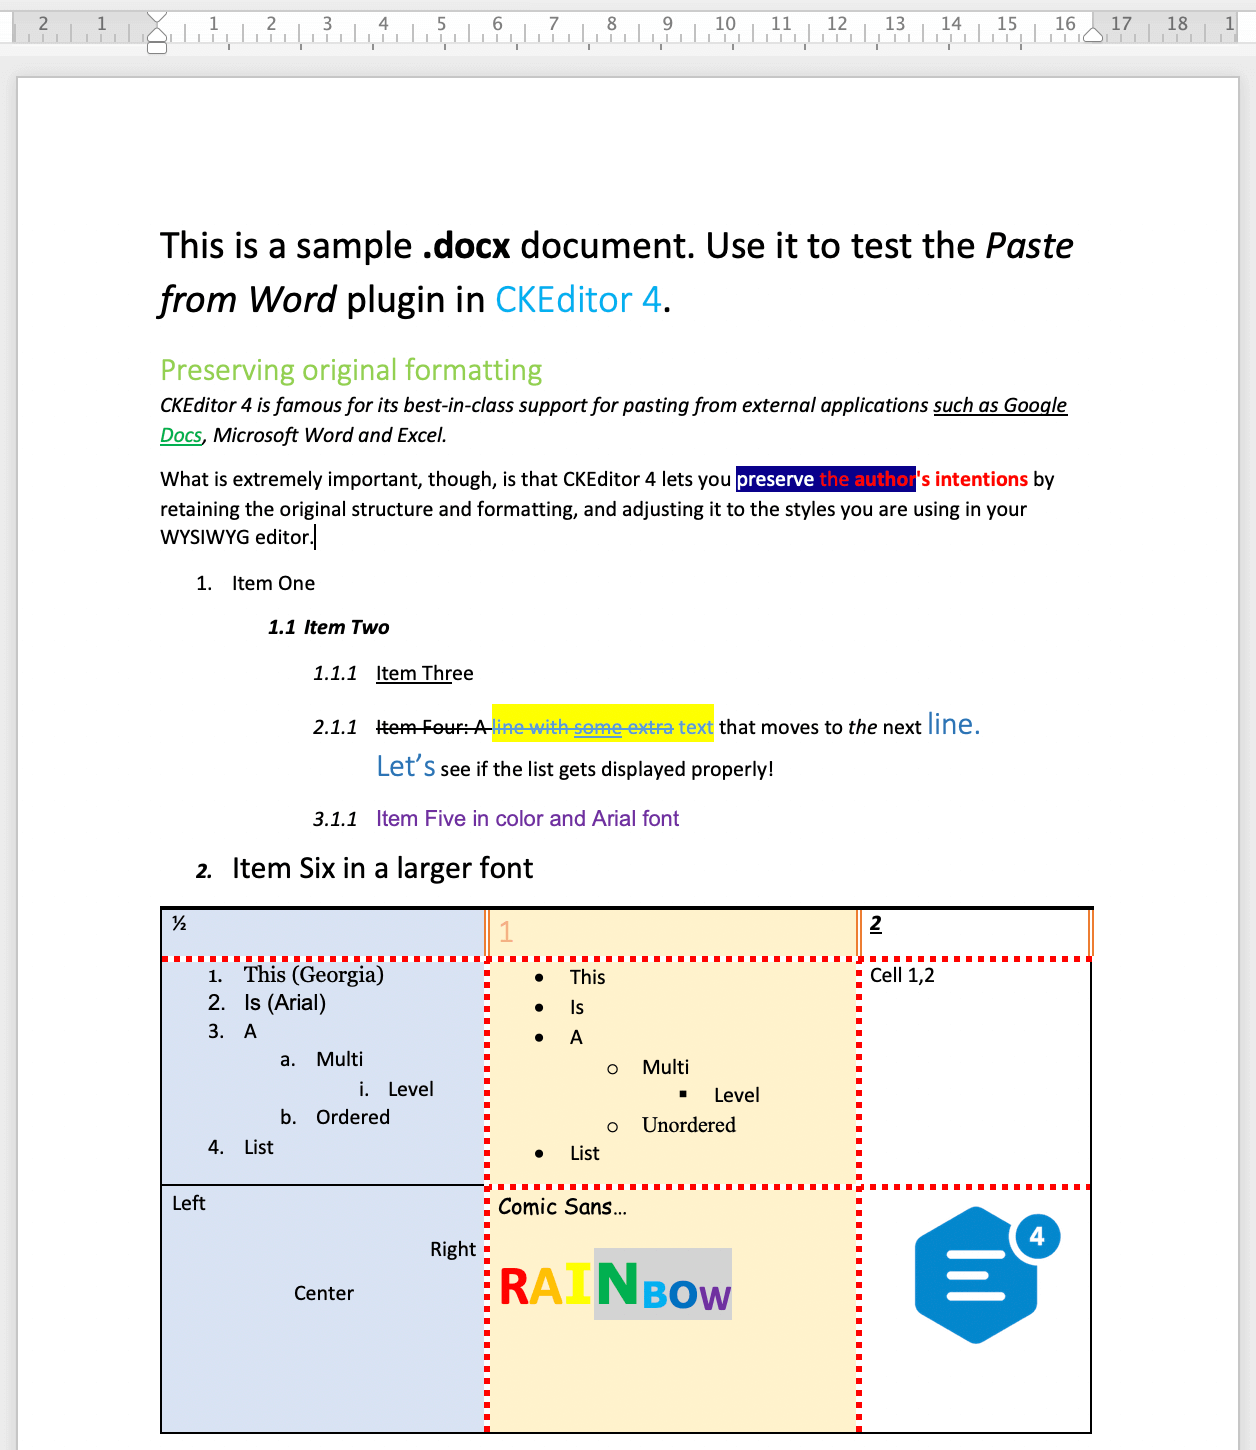 A sample Microsoft Word document with complex formatting and image.